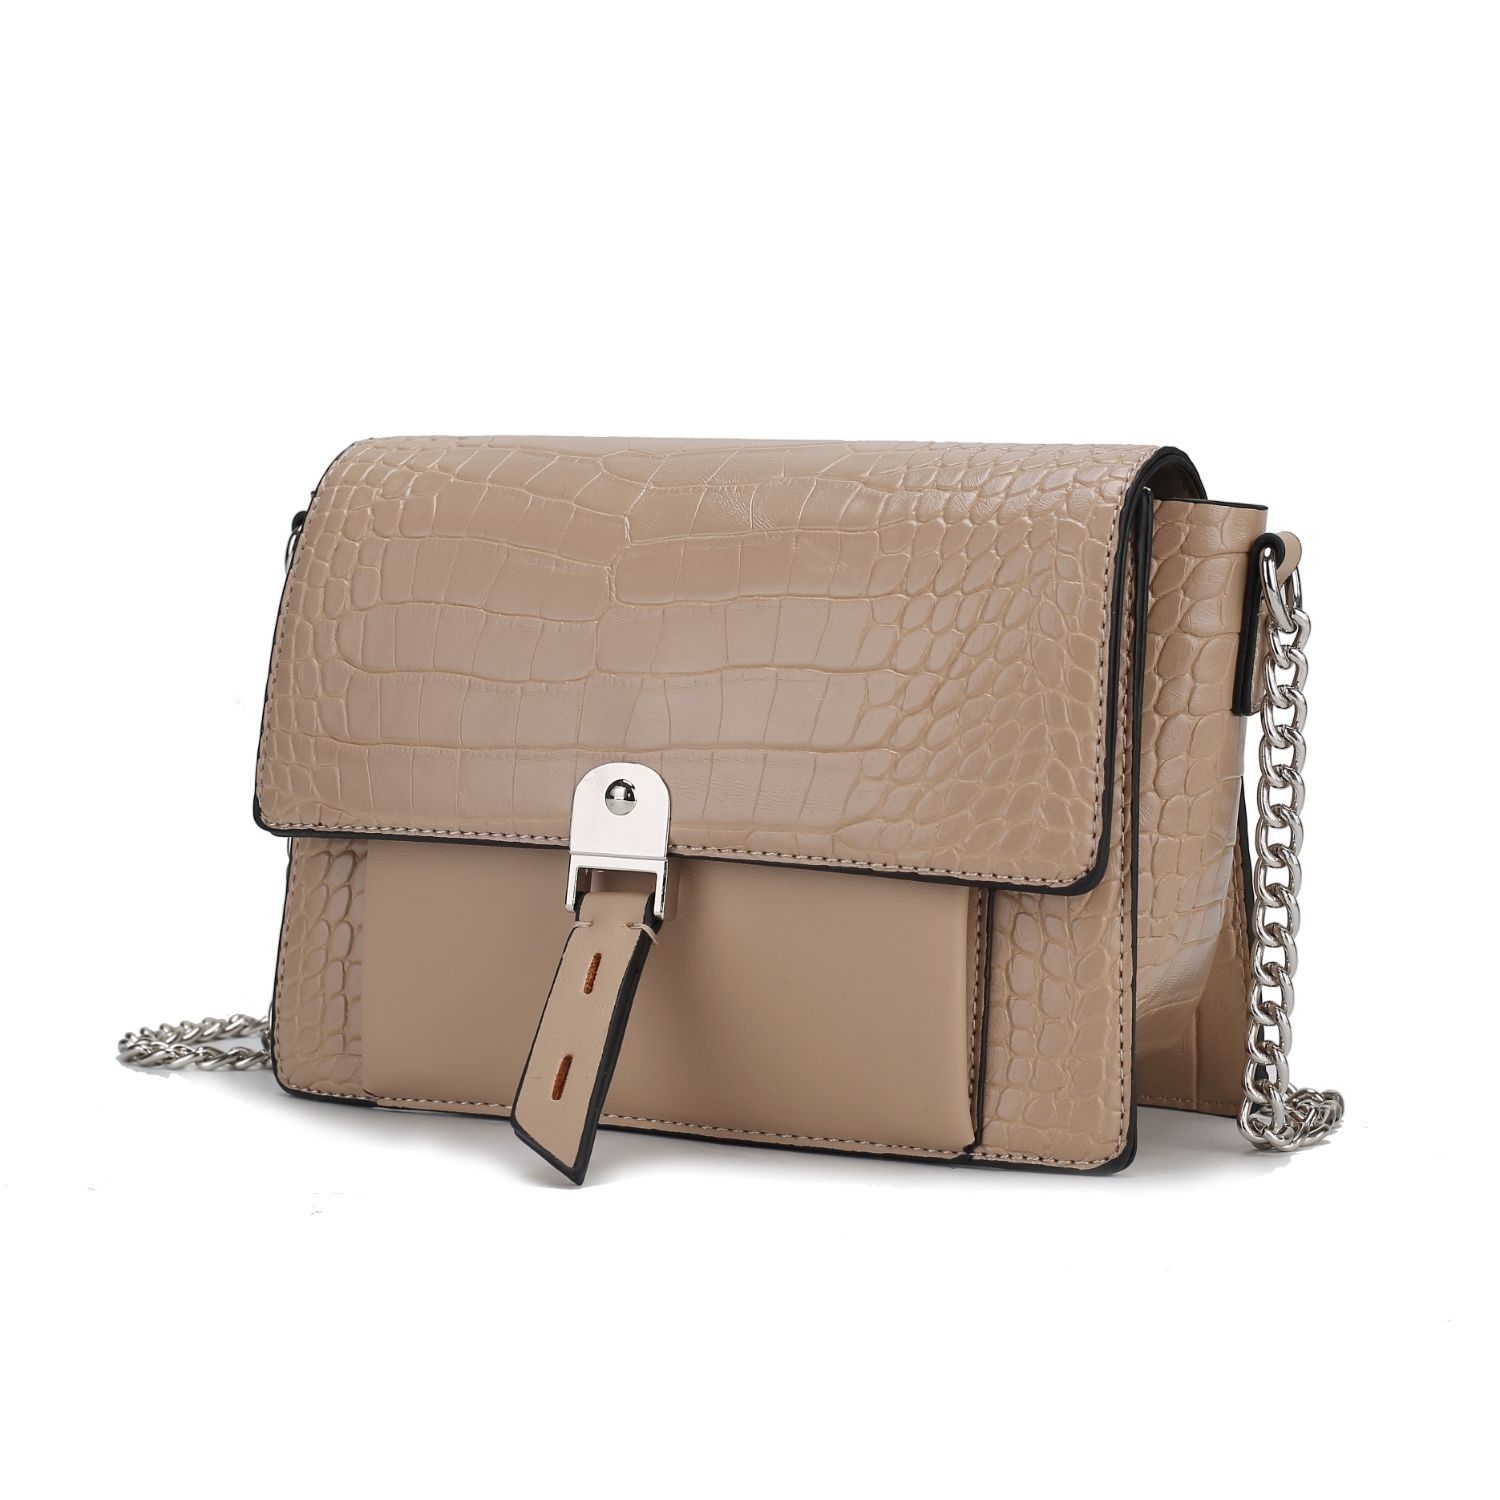 MKF Collection Hope Crocodile Embossed Vegan Leather Womens Shoulder Bag By Mia K - Taupe